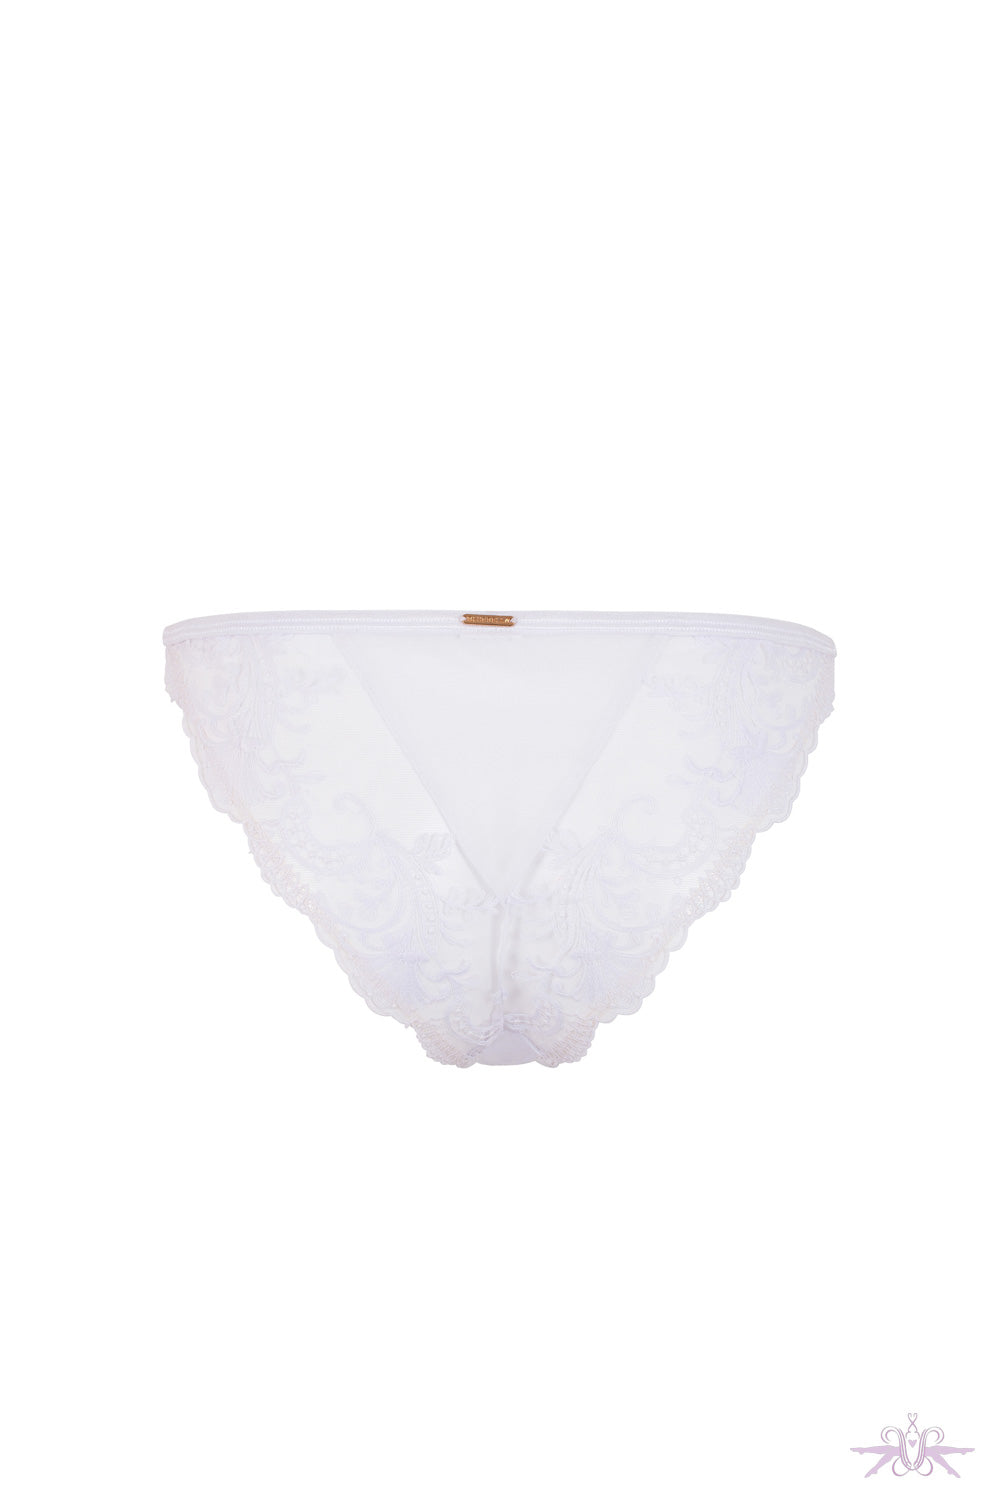 Bluebella Marseille White Brief at the Hosiery Box White Pants and ...